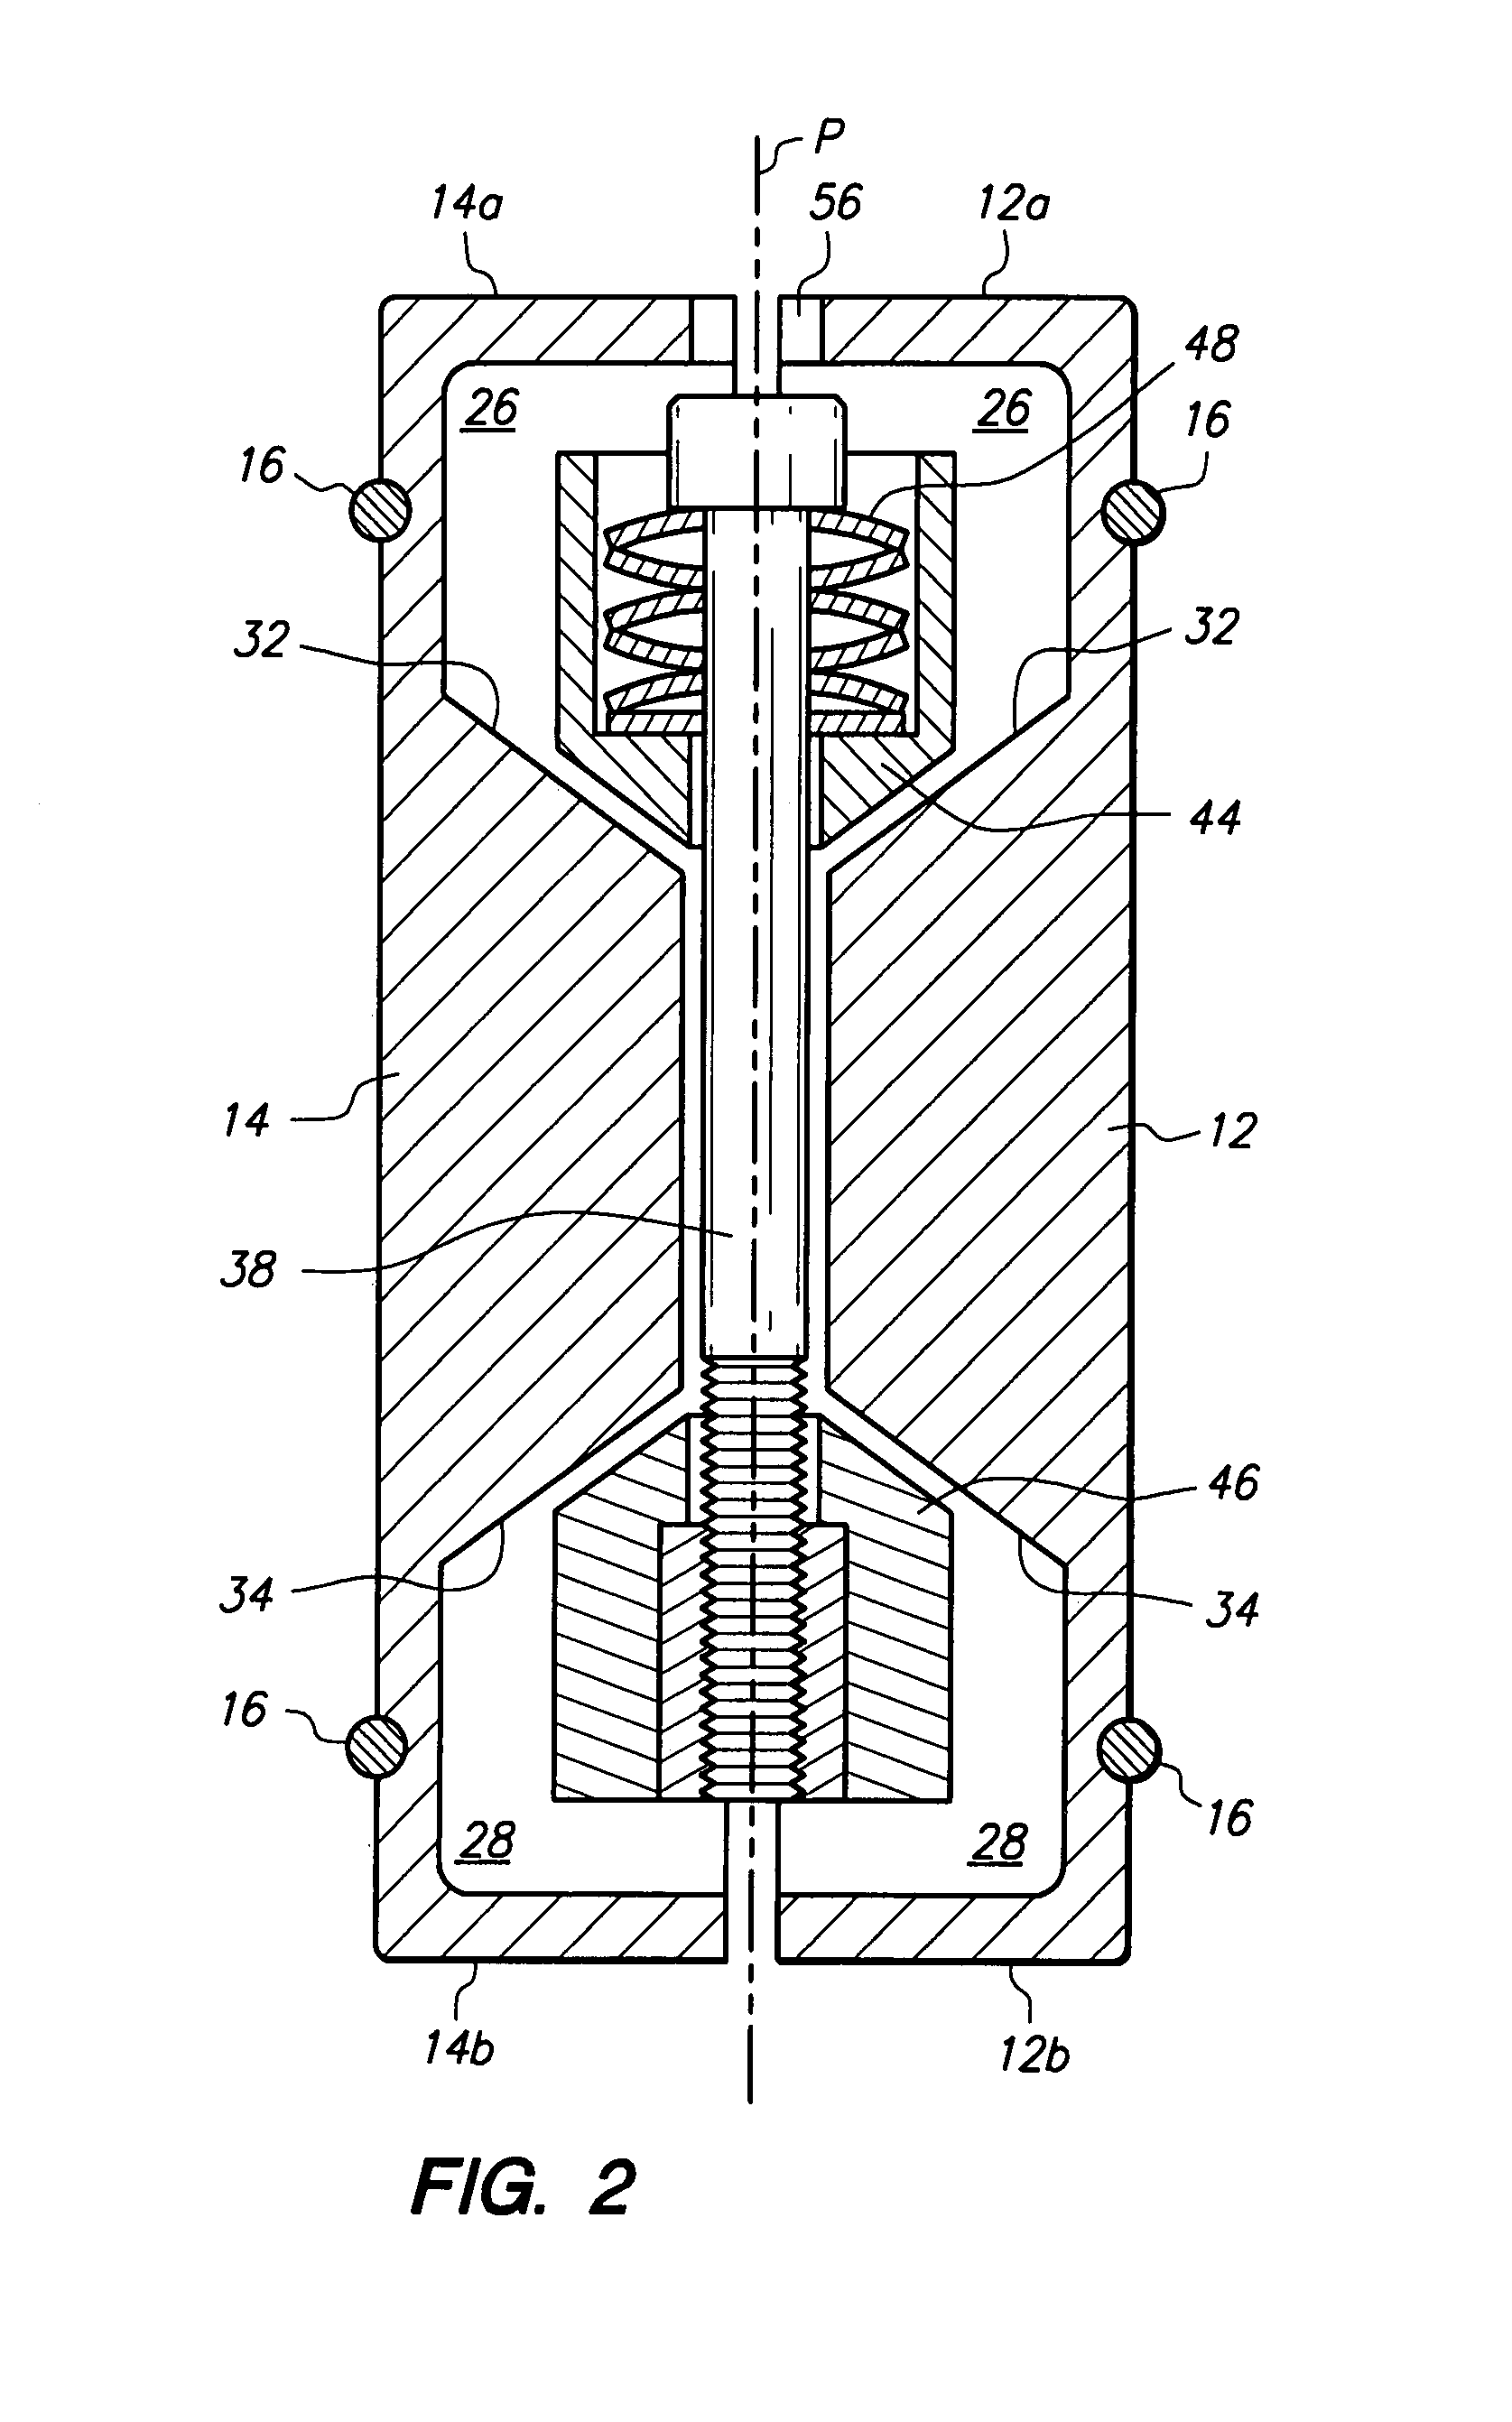 Concrete slab joint stabilizing system and apparatus